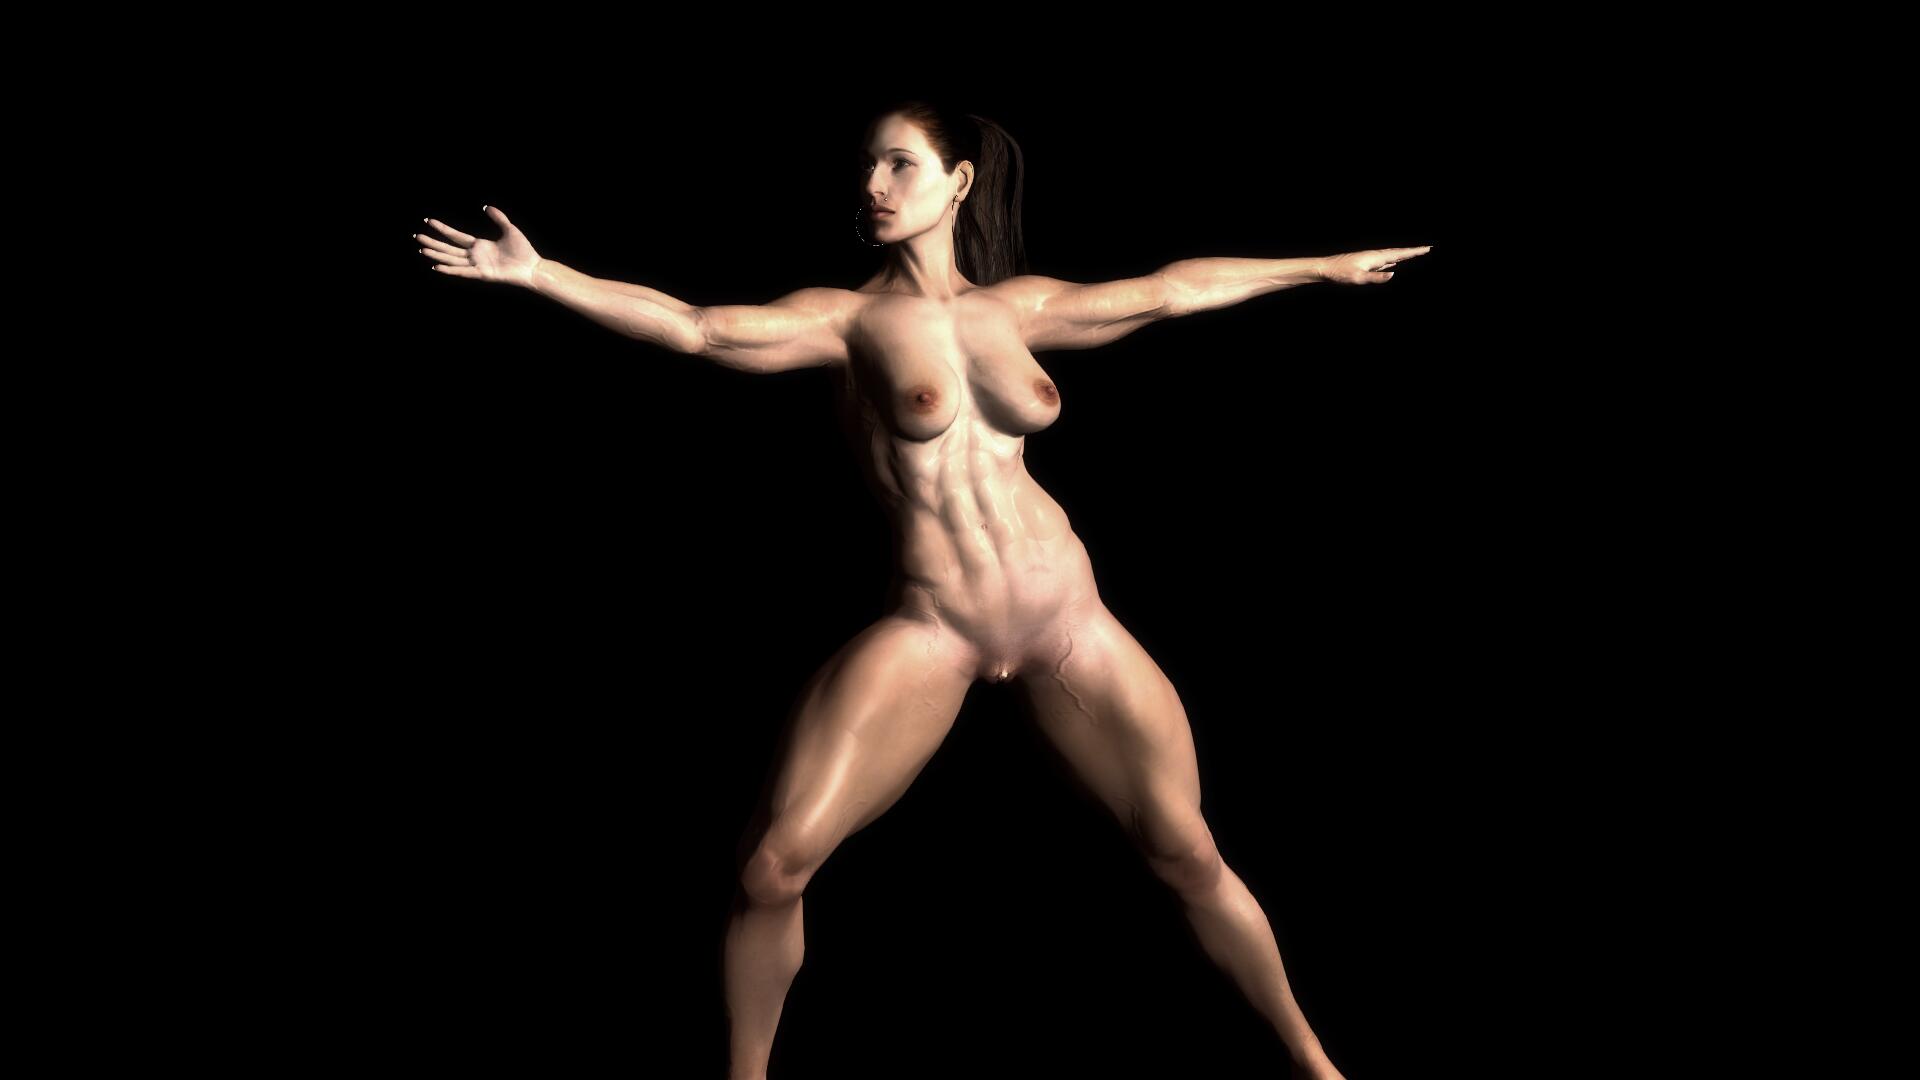 Nobel P. reccomend shemuscle girl andrea giabella pussy